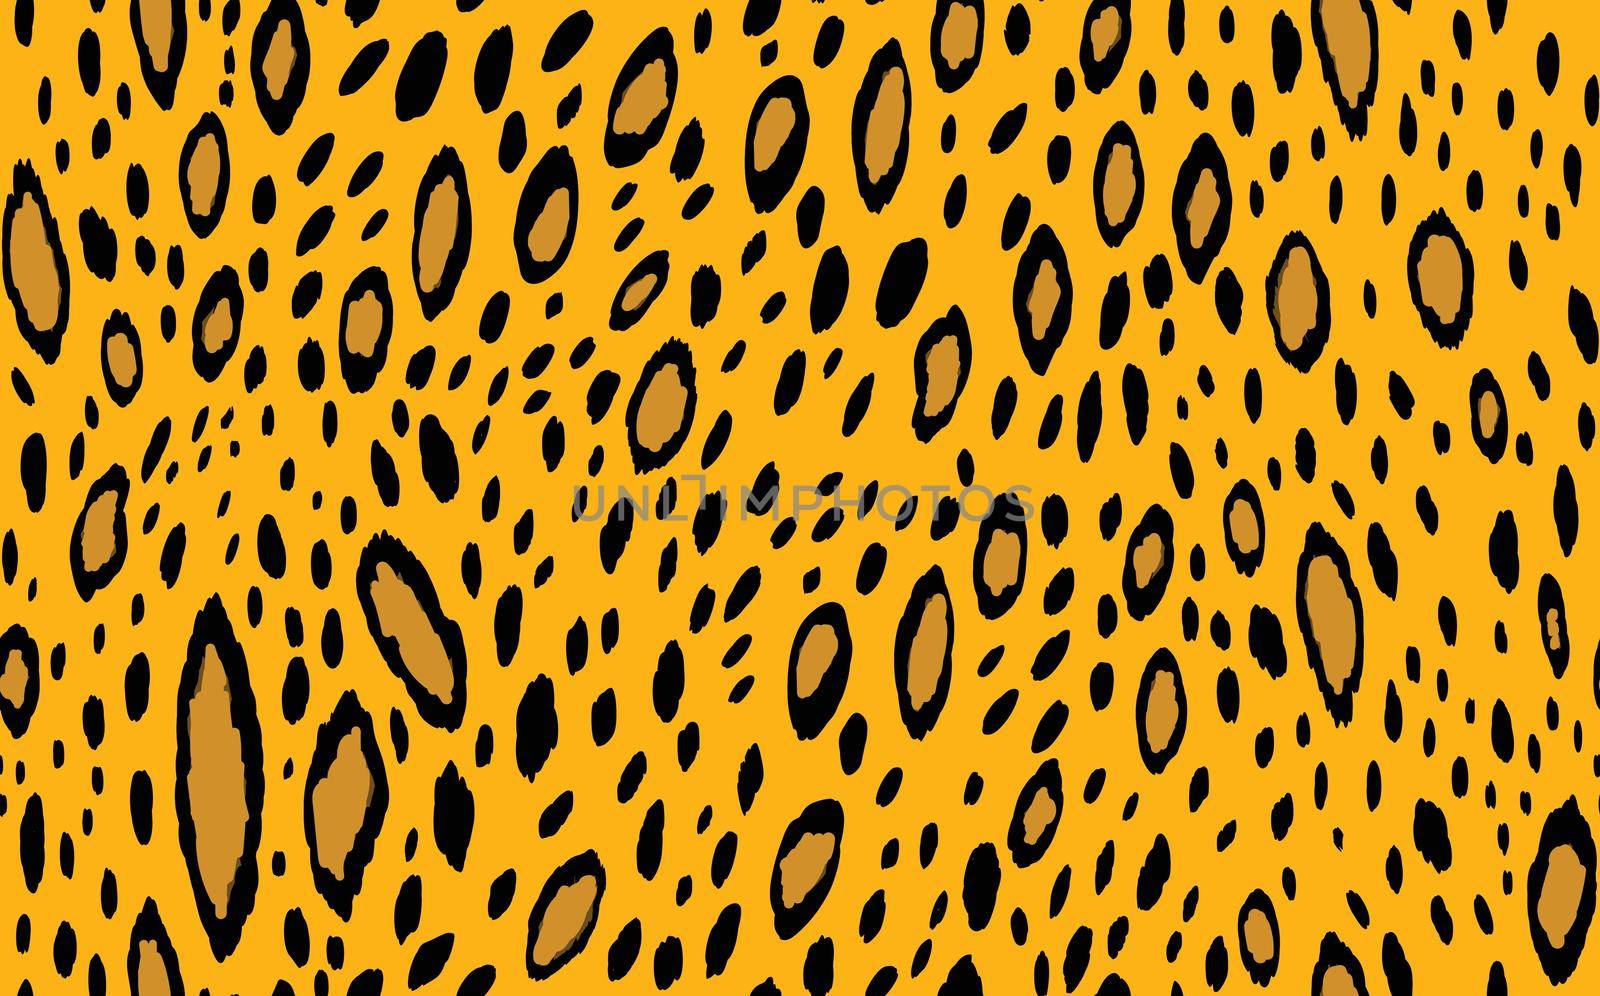 Abstract modern leopard seamless pattern. Animals trendy background. Orange and black decorative vector stock illustration for print, card, postcard, fabric, textile. Modern ornament of stylized skin.